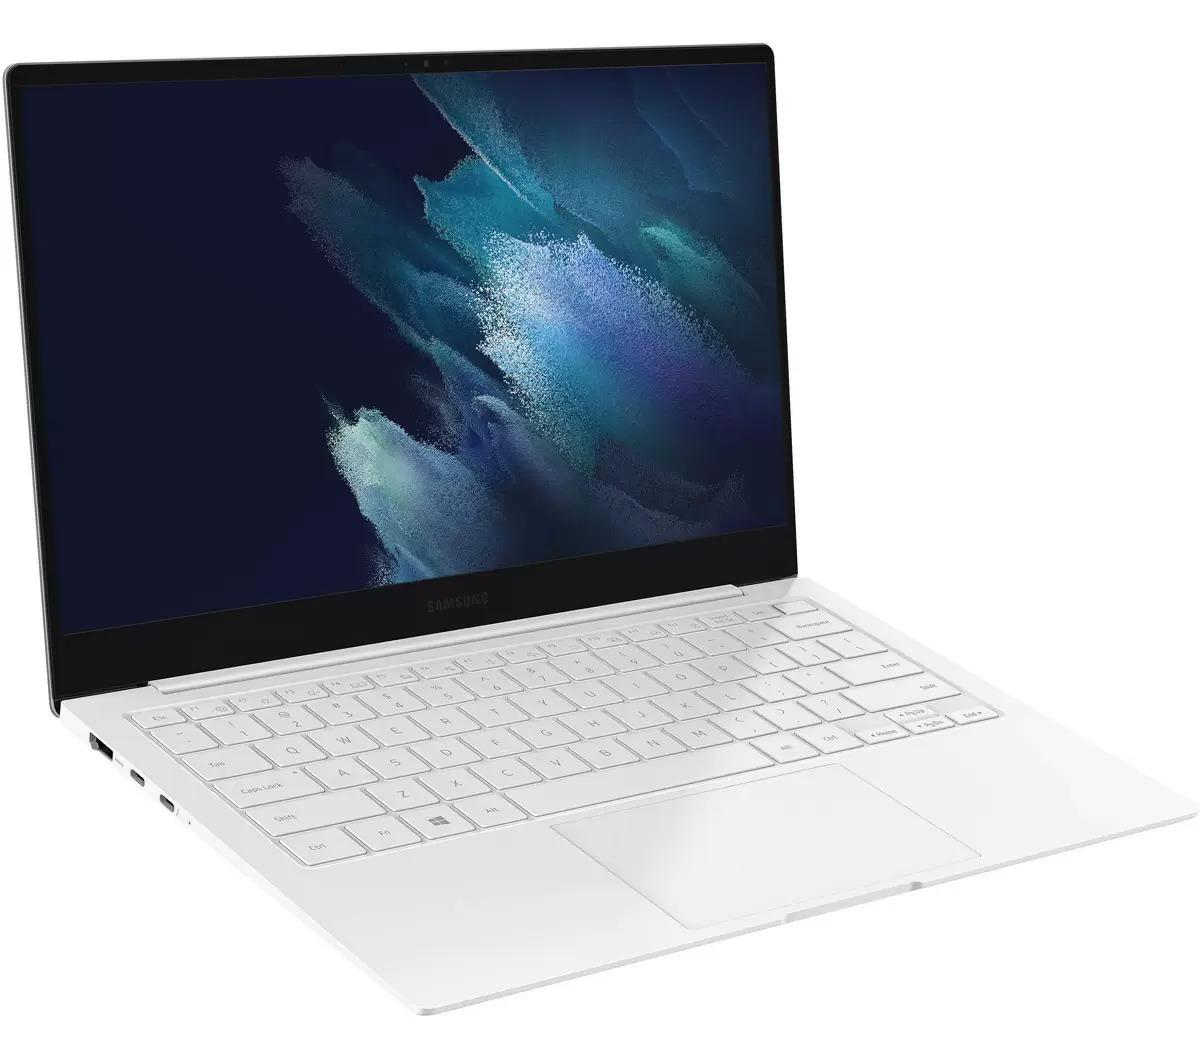 Samsung Galaxy Book Pro 13.3 i5 Laptop with Buds Pro for $599.99 Shipped